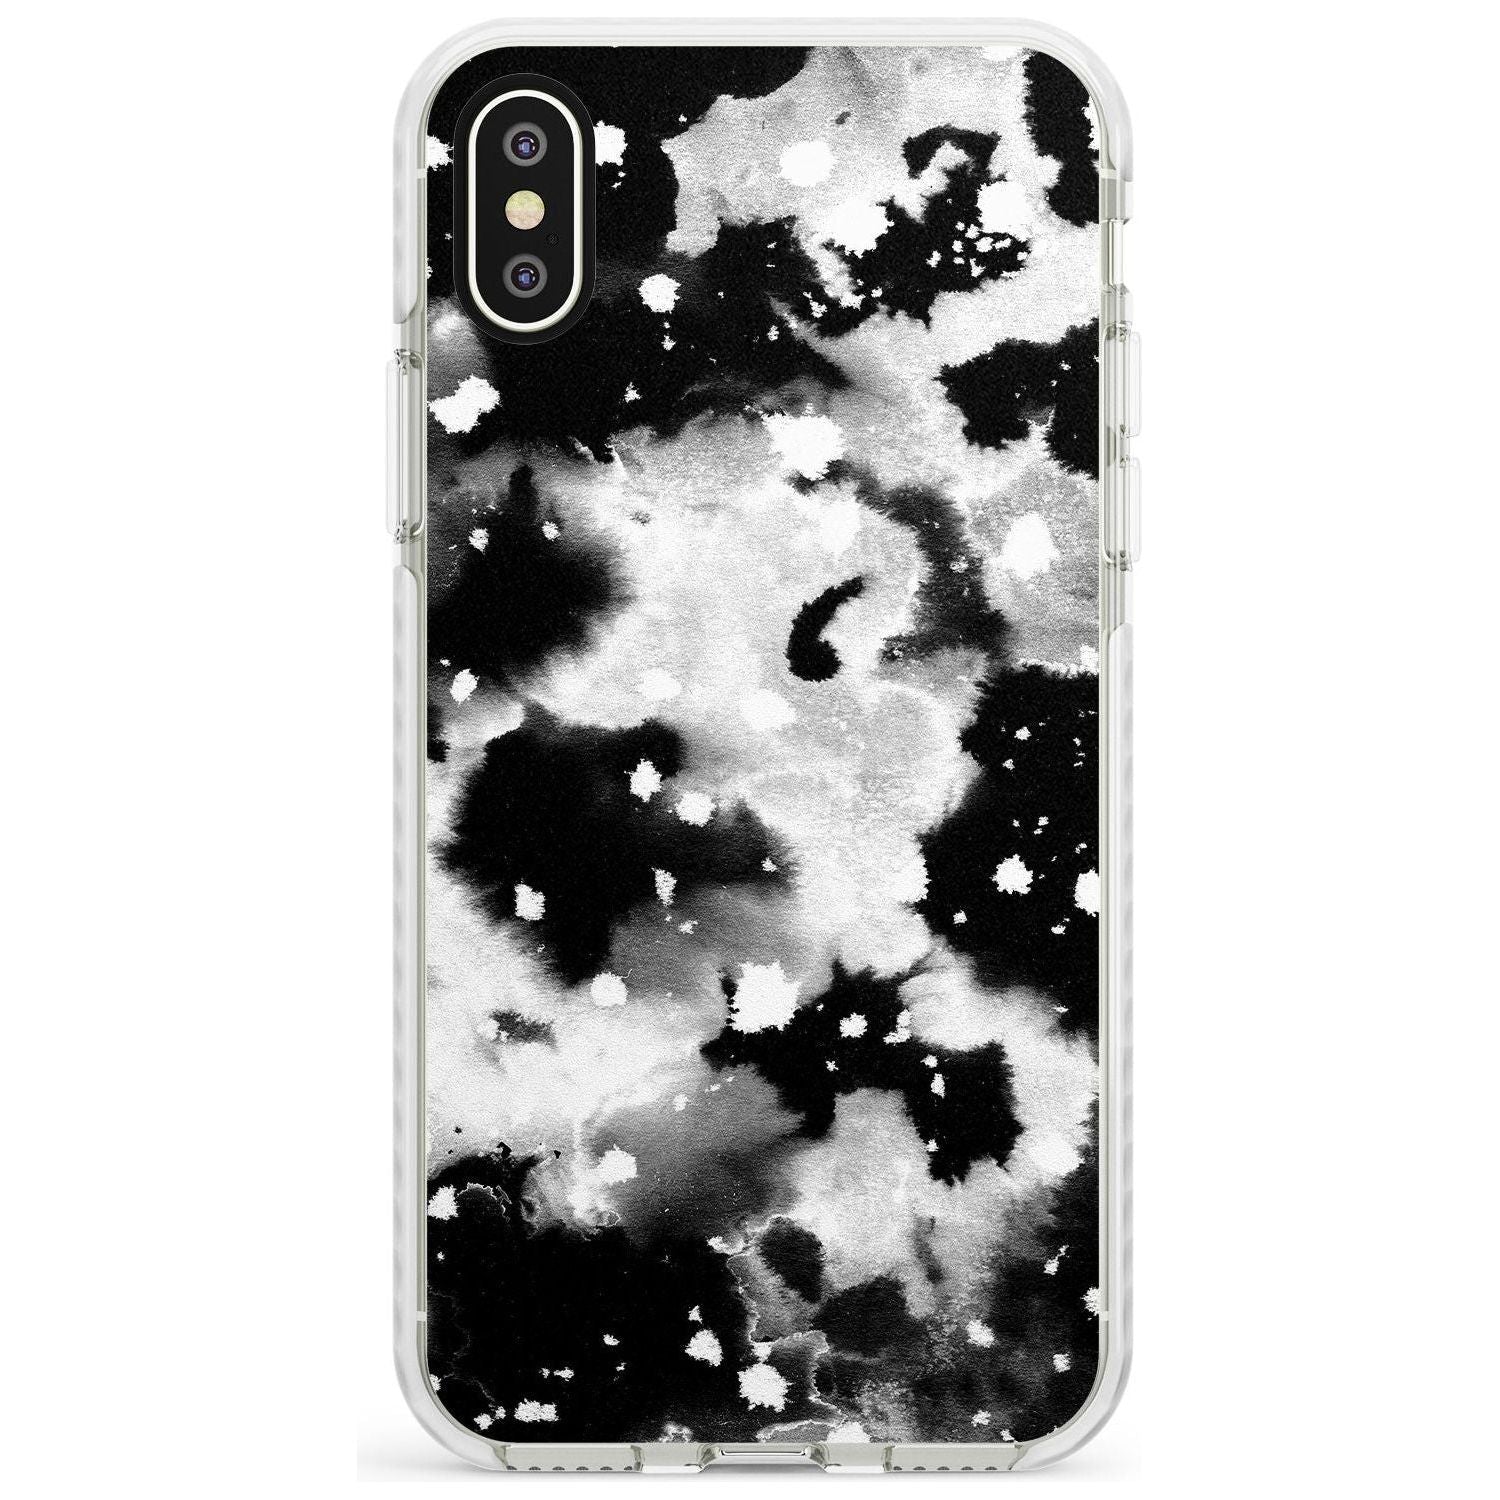 Black & White Acid Wash Tie-Dye Pattern Impact Phone Case for iPhone X XS Max XR